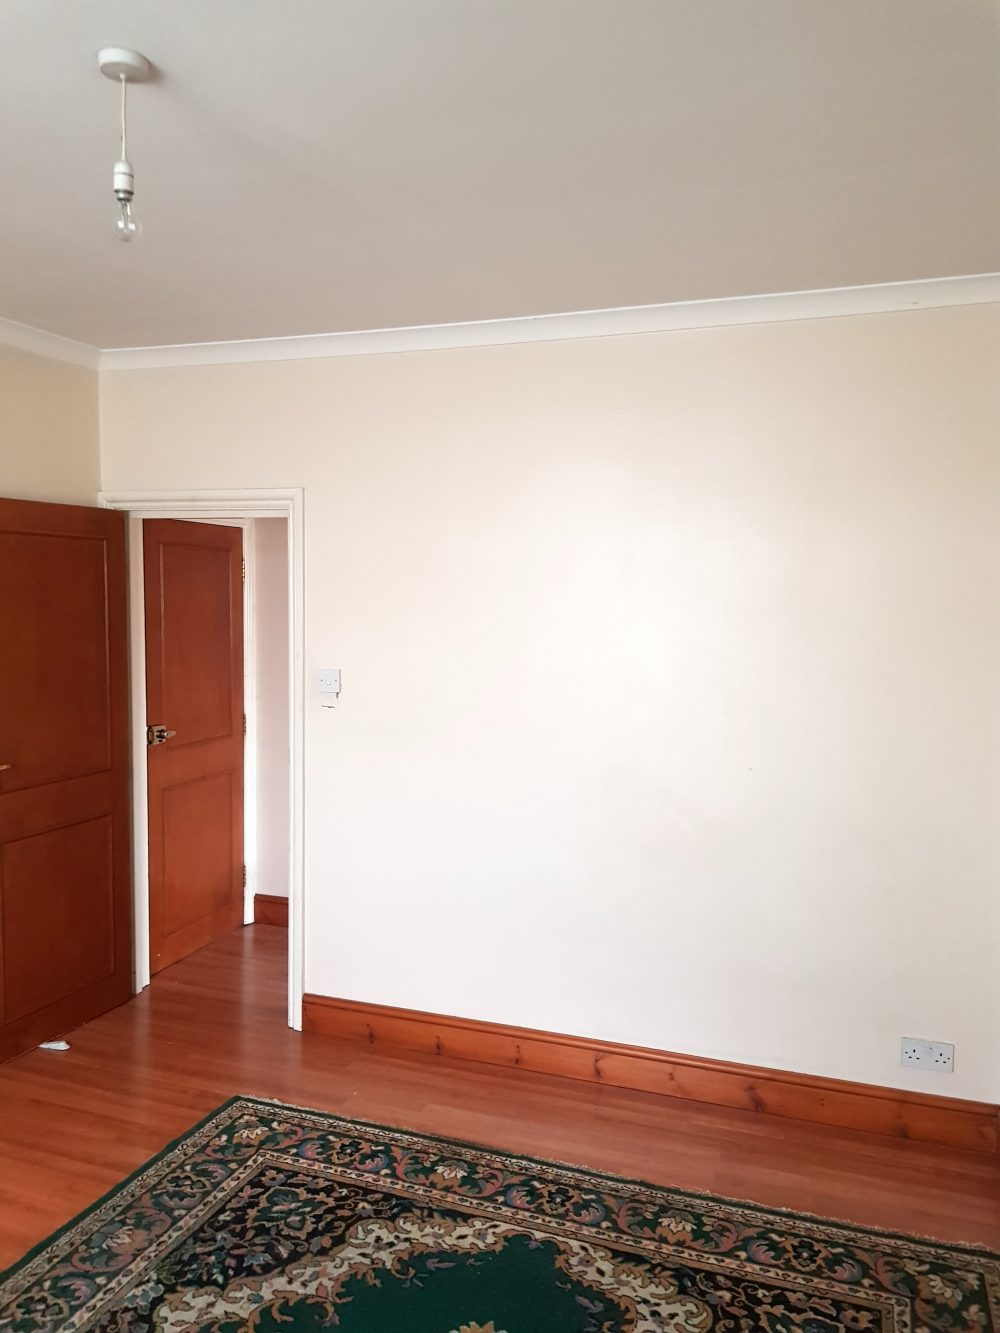 2 Bed Flat to rent in N15 Manor House Pic 6